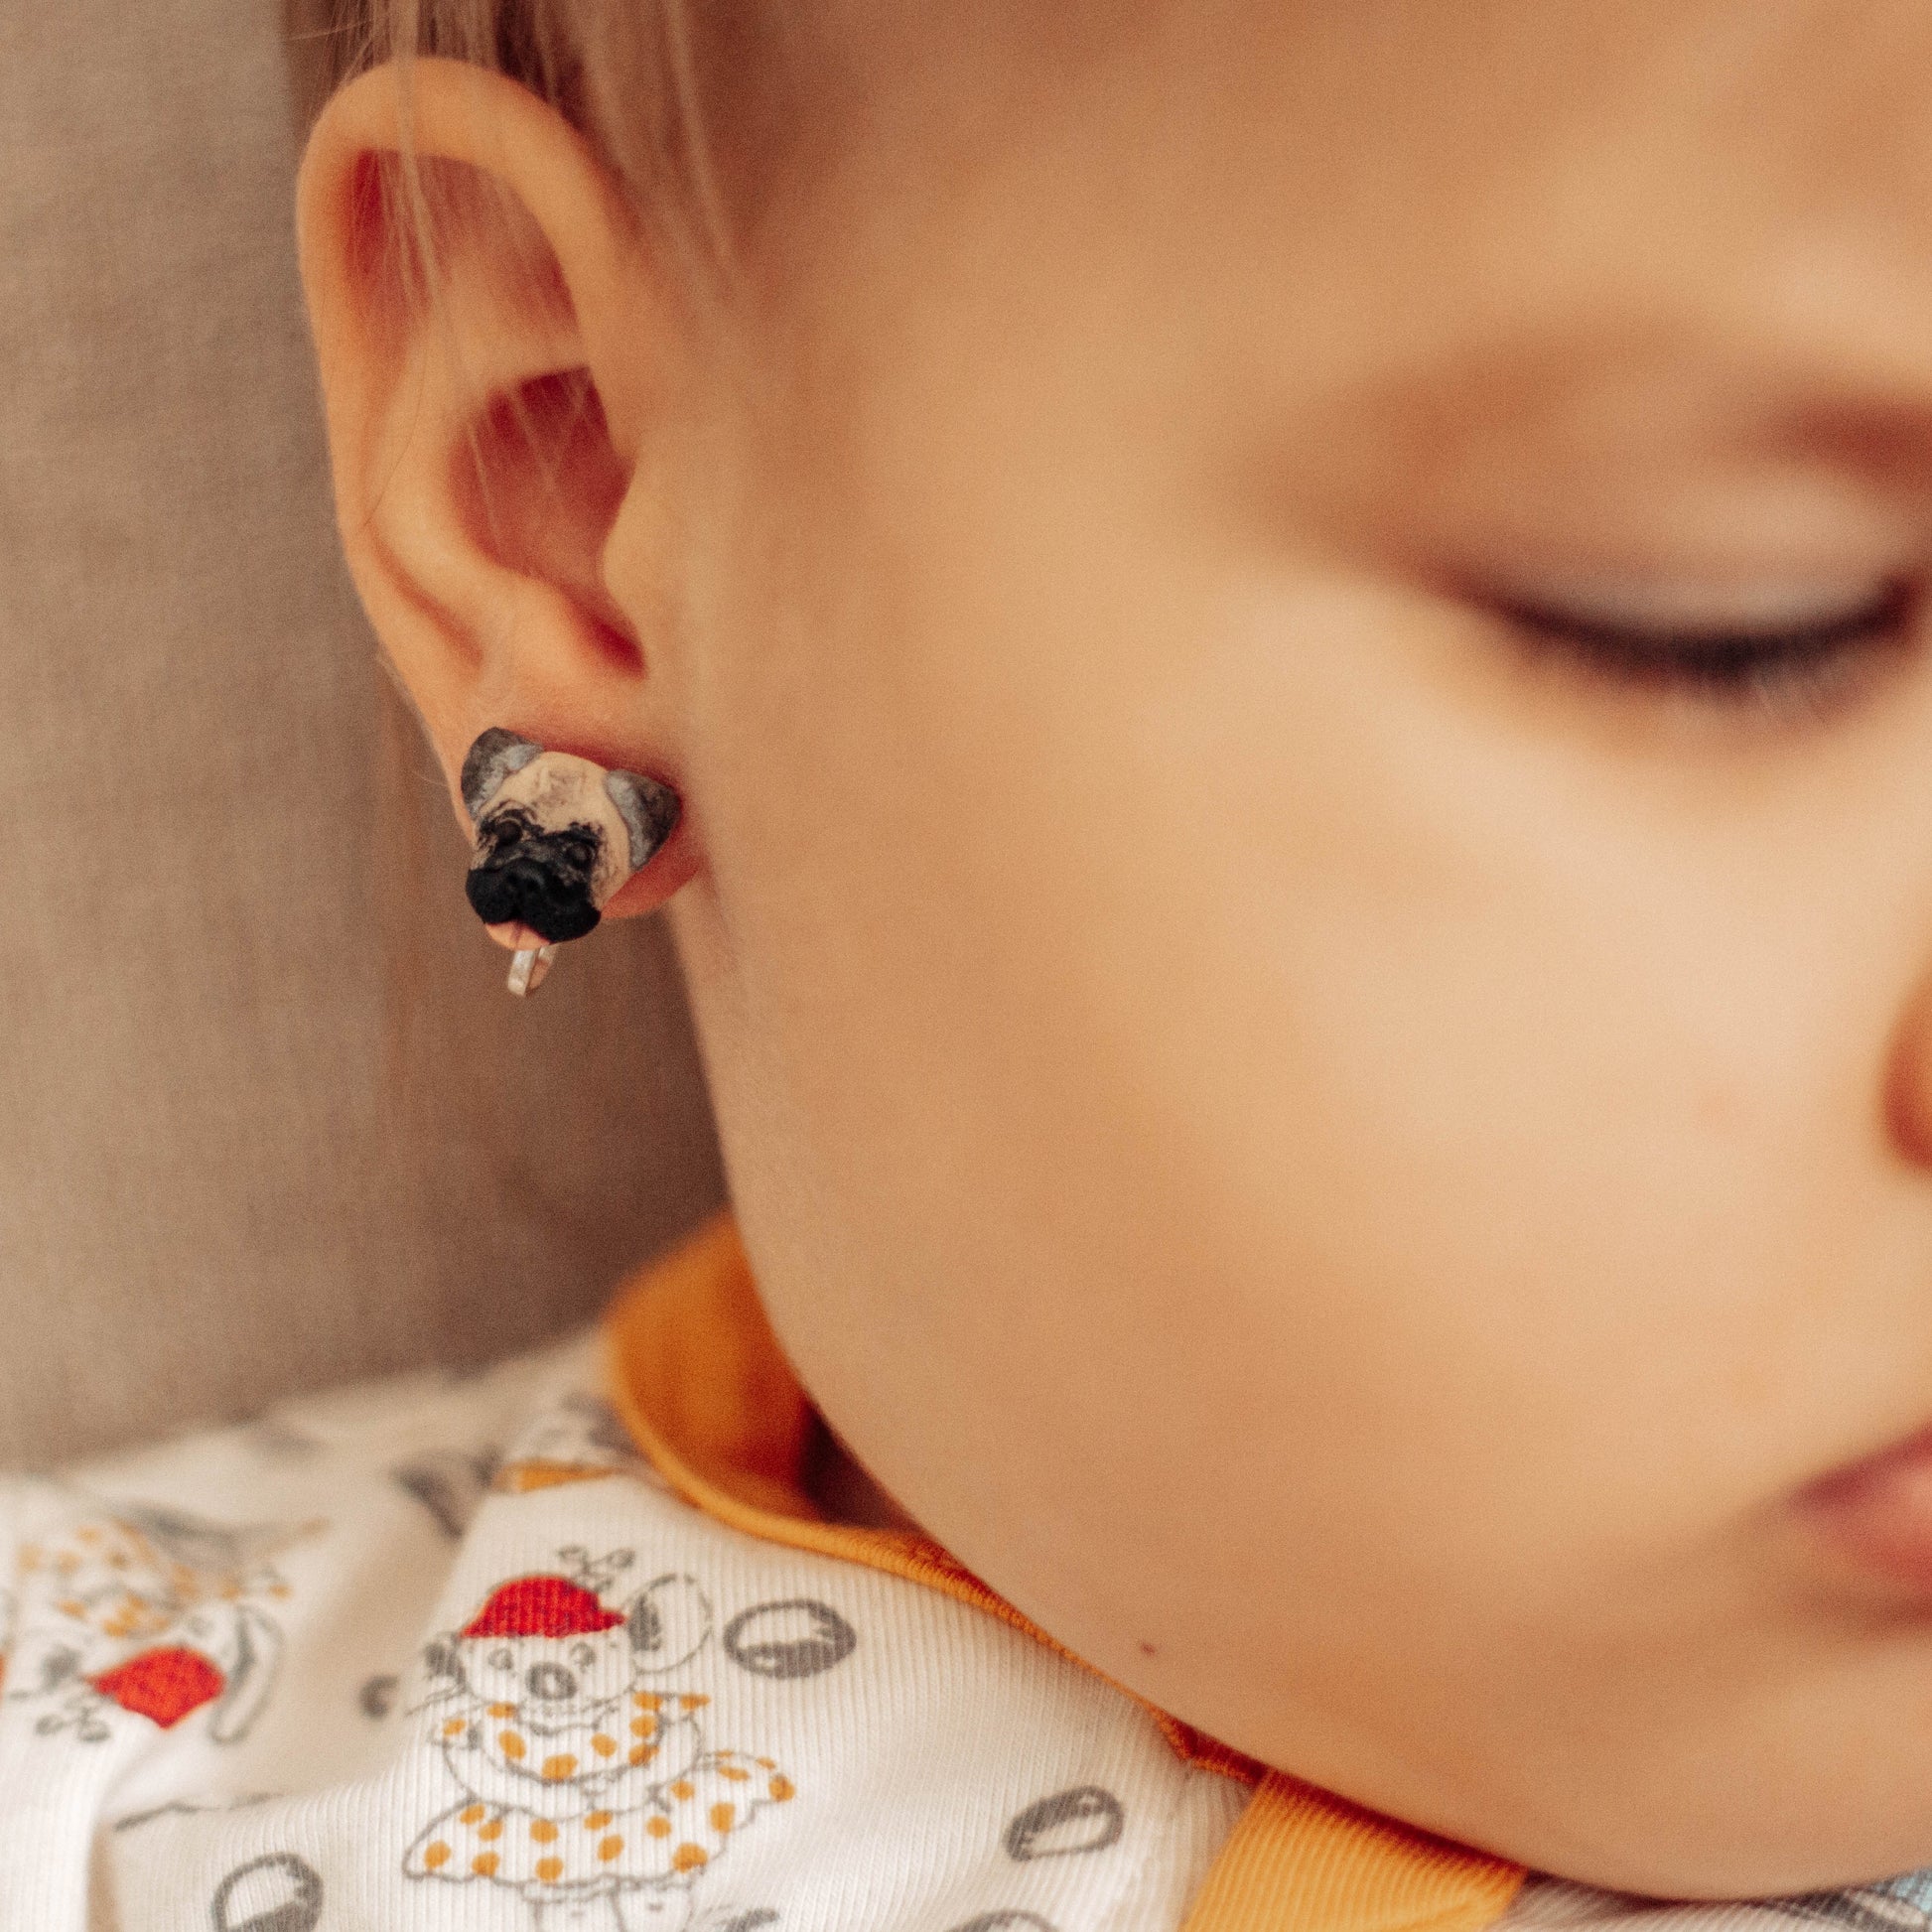 Clip-on custom pug dog earrings being worn by a small child.